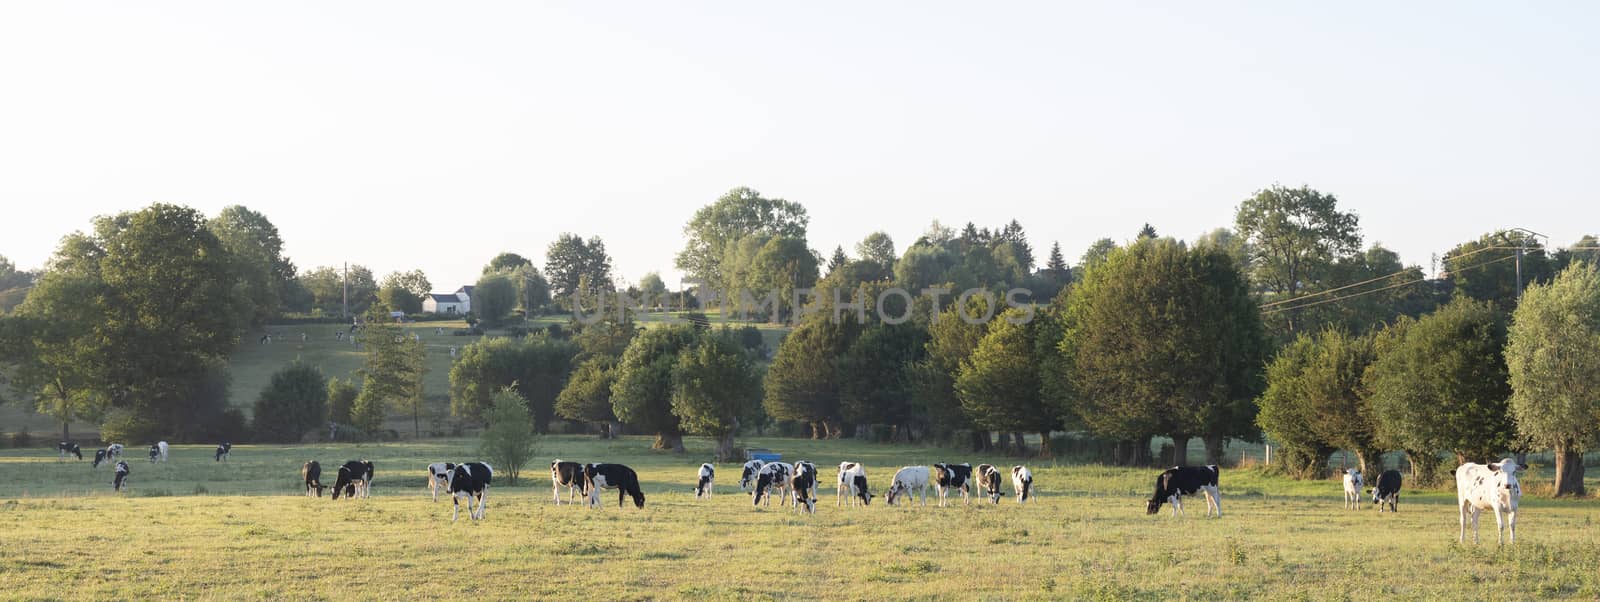 cows in the north of france near saint-quentin and valenciennes under blue sky in summer